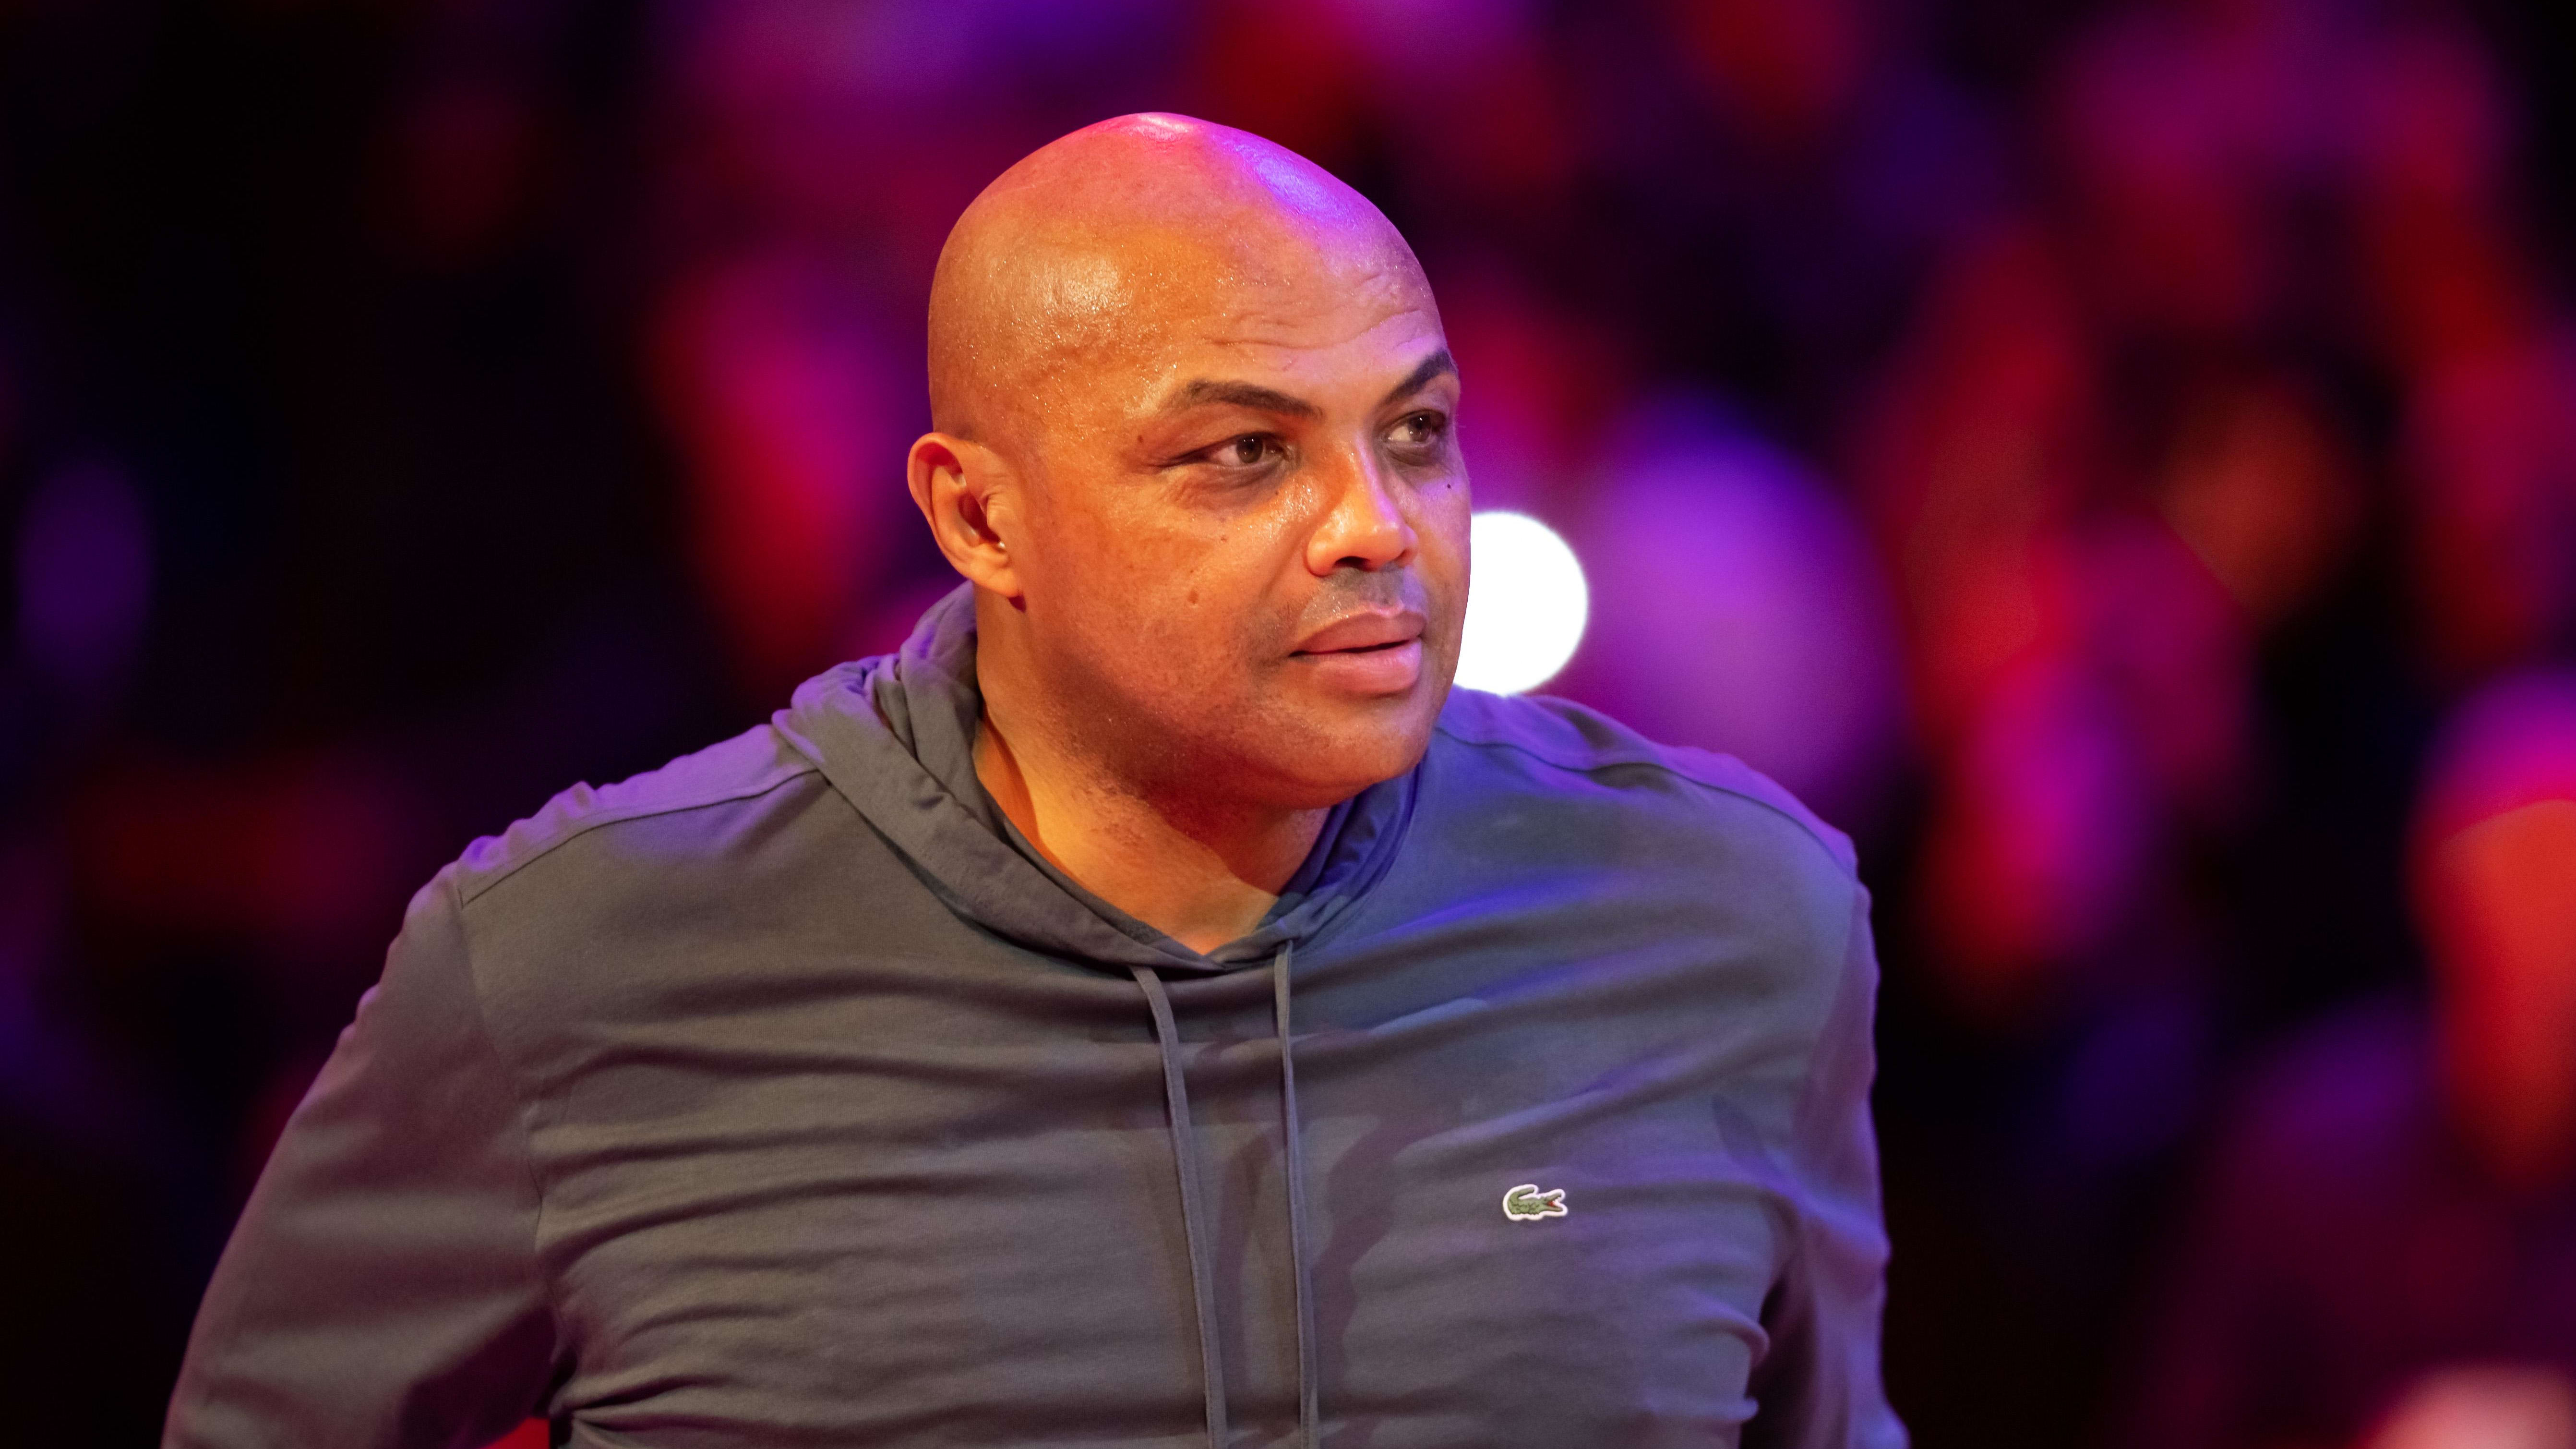 Charles Barkley explained why he hopes Los Angeles Lakers star LeBron James retires from the NBA soon. 